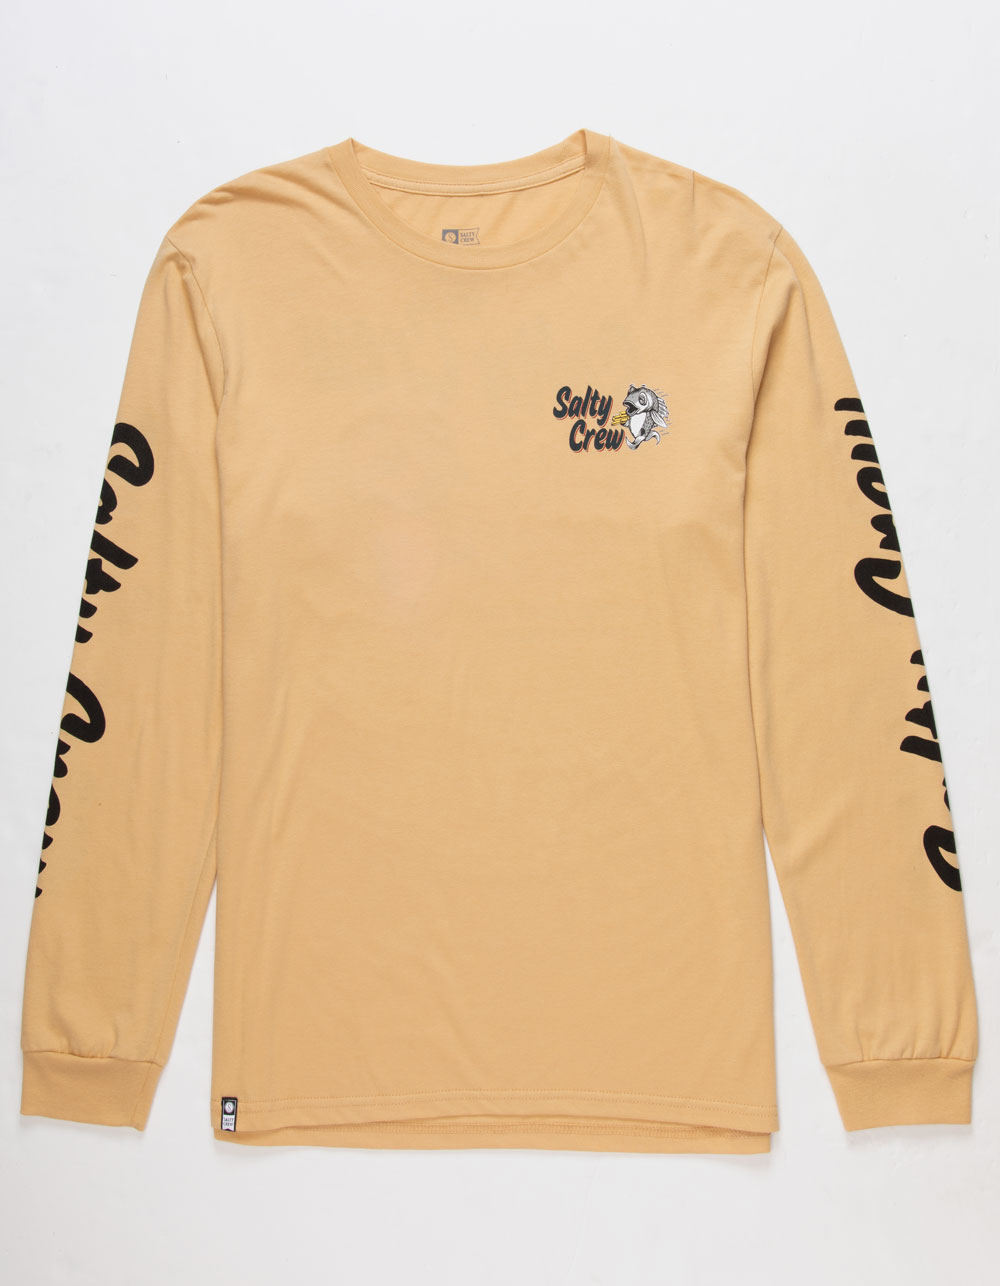 SALTY CREW Fish And Chips Mens Long Sleeve Tee - CAMEL